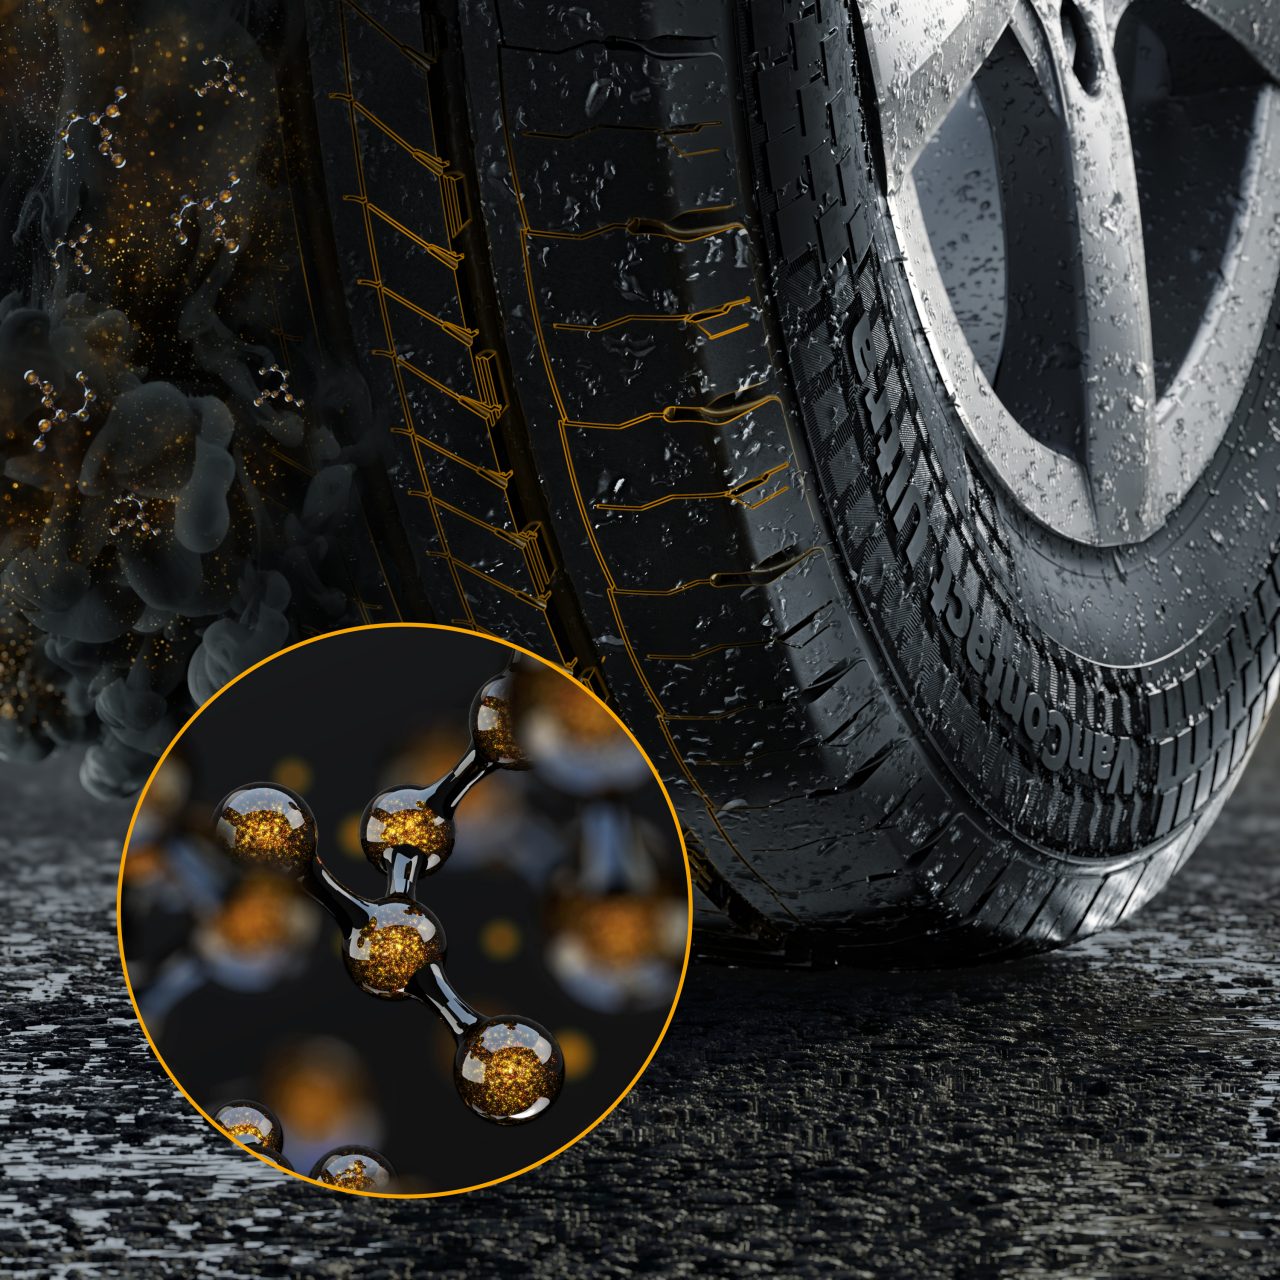 Tyre_Reviews